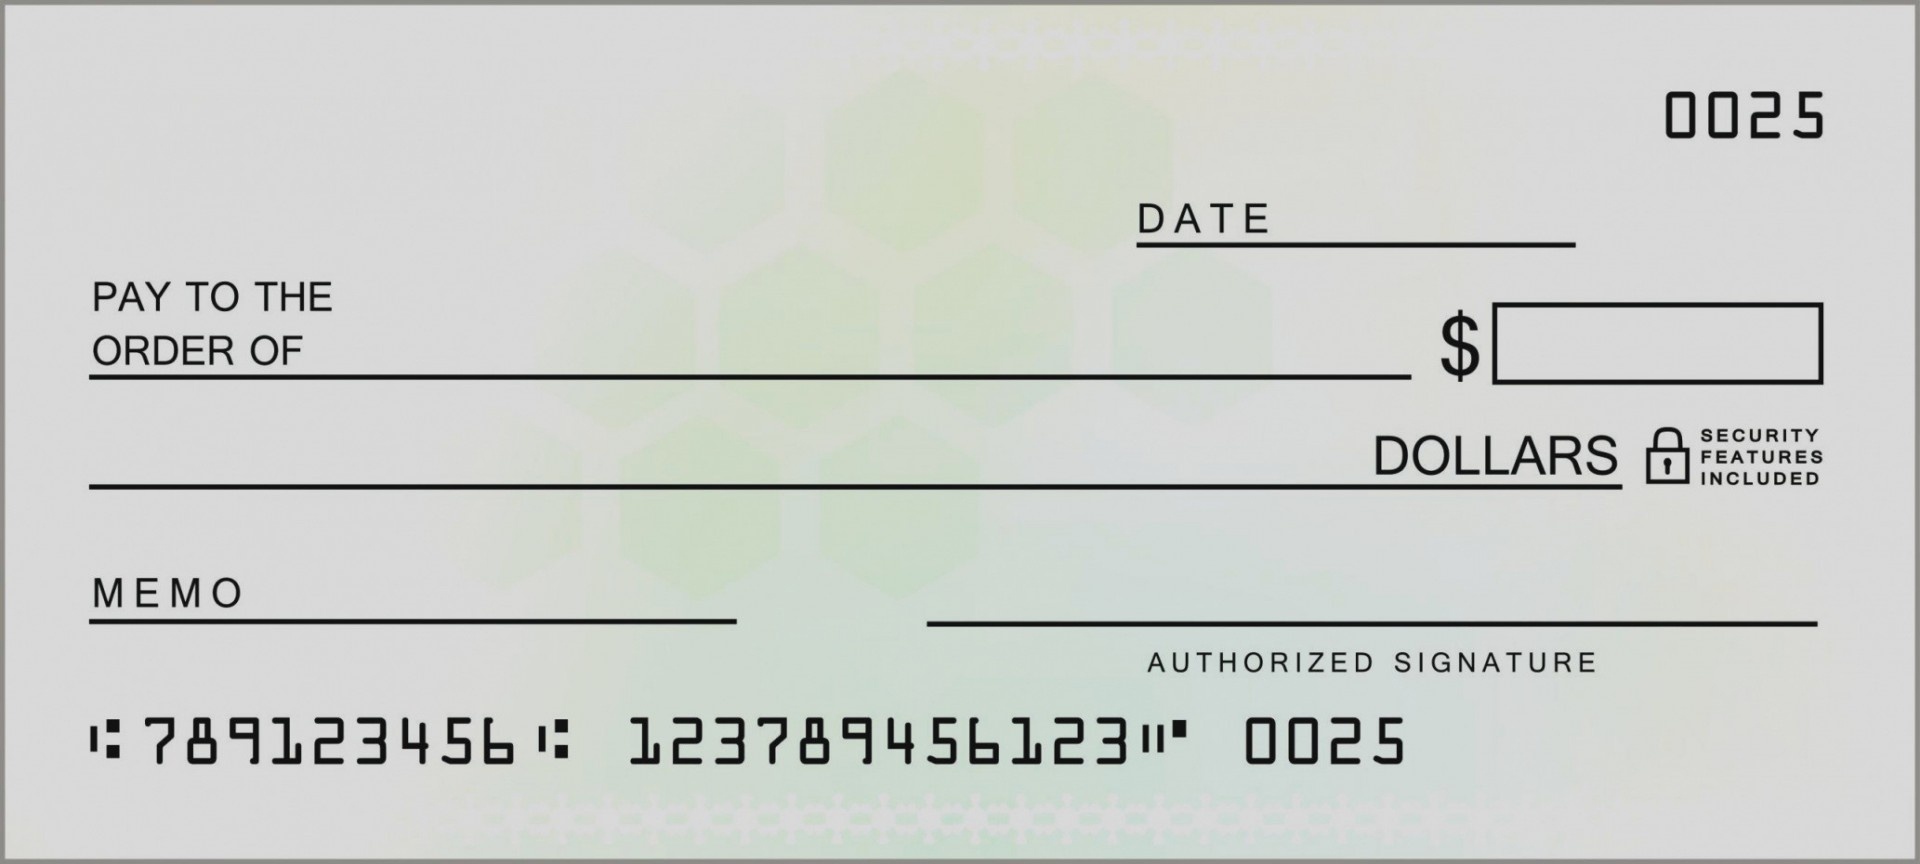 021 Fake Blank Check Template Cheque Free Awesome Payroll Templates - Free Printable Blank Checks